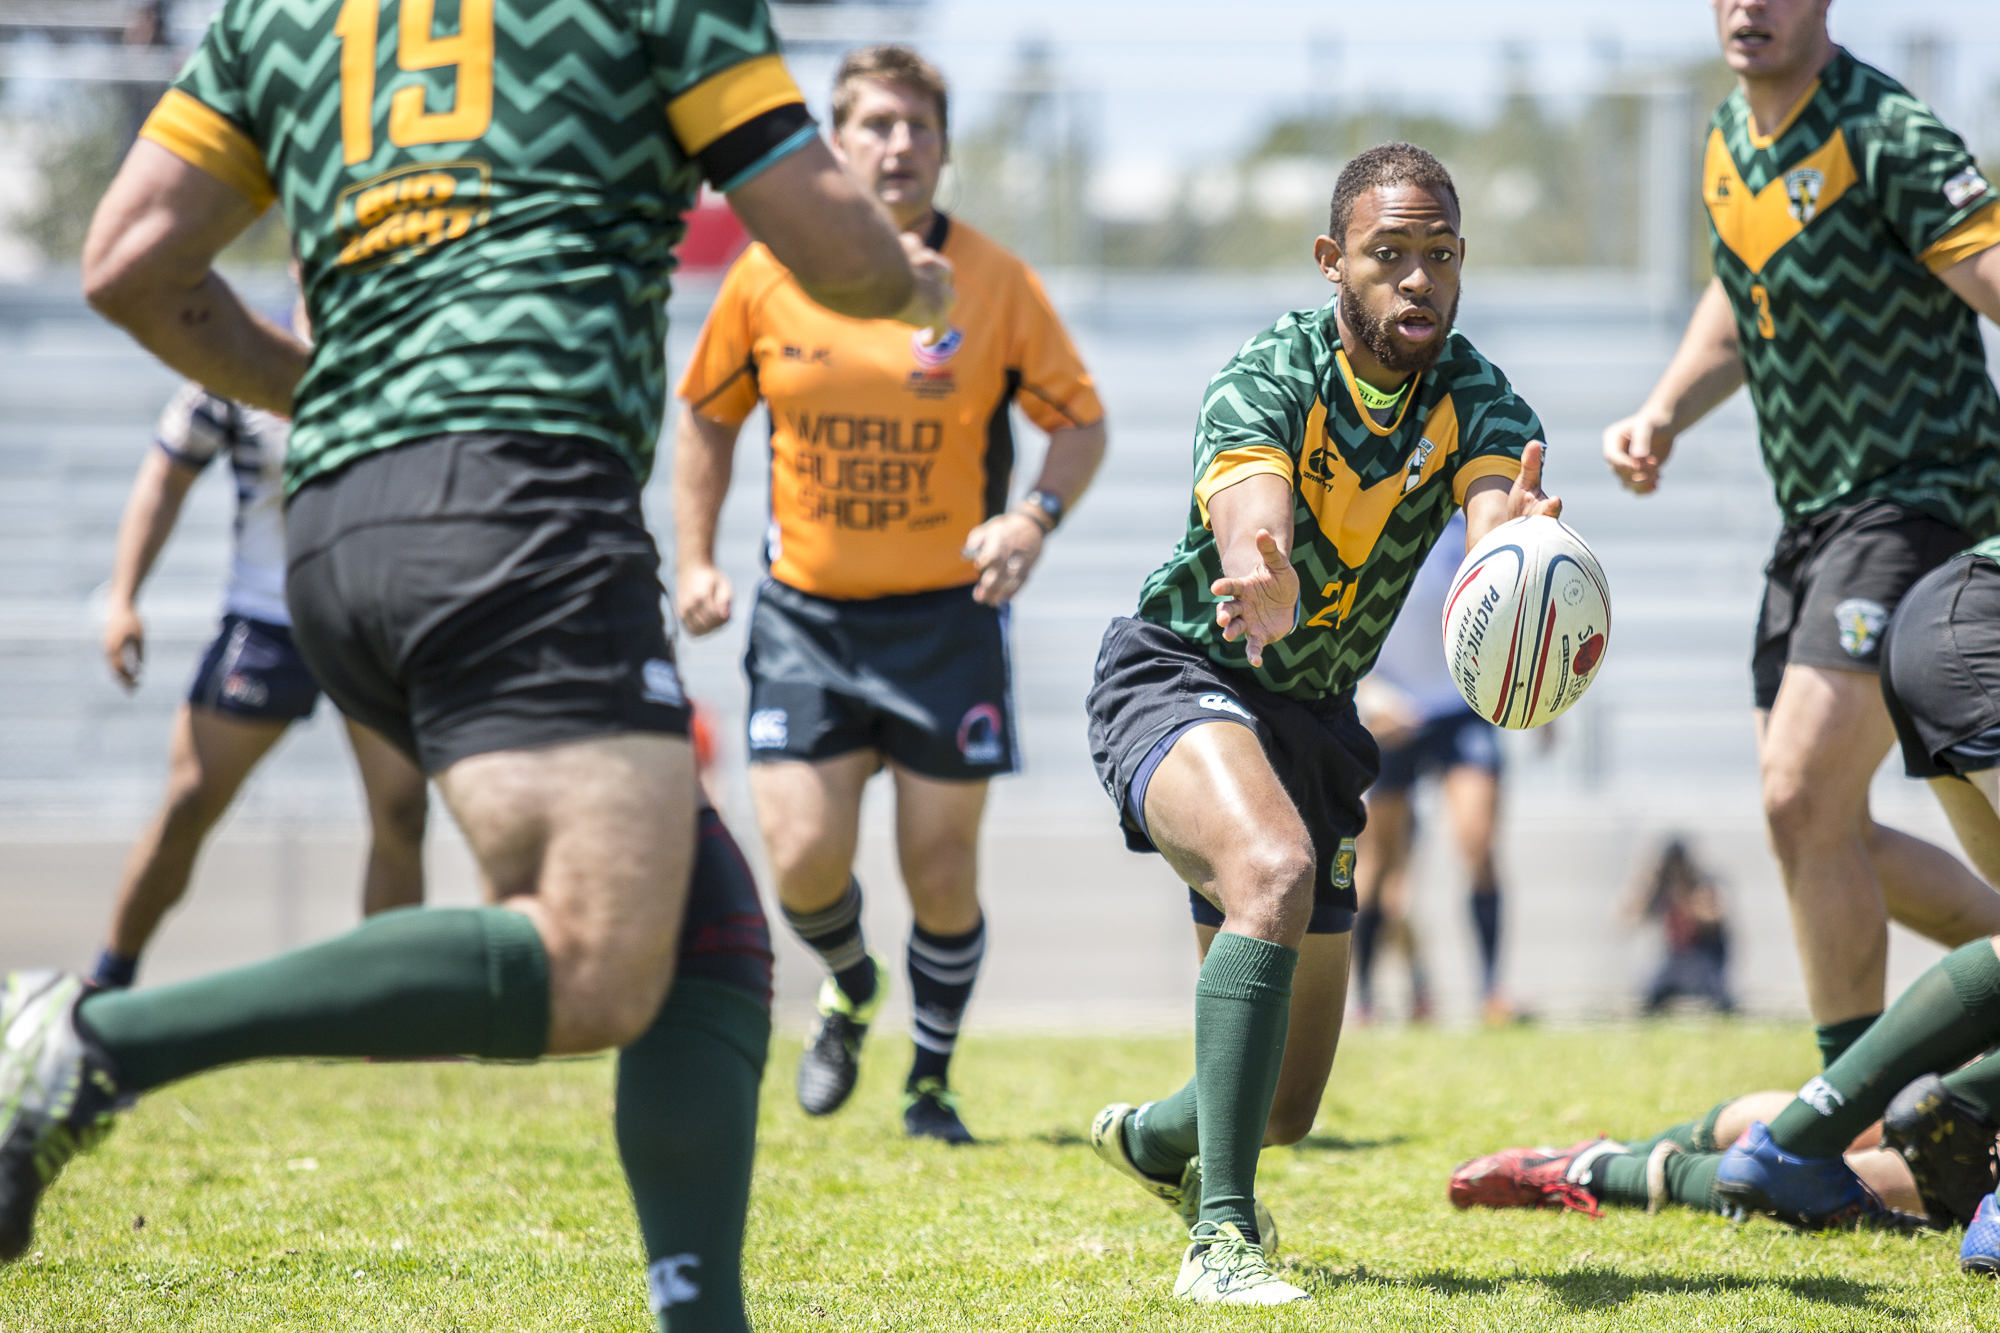  A Santa Monica Dolphin rugby back passes the ball to his teammate during the 2nd half of the game against the Old Mission Beach Athletic Club at Westchester High School in Westchester California on Saturday April 28 2018. The Santa Monica Dolphins w